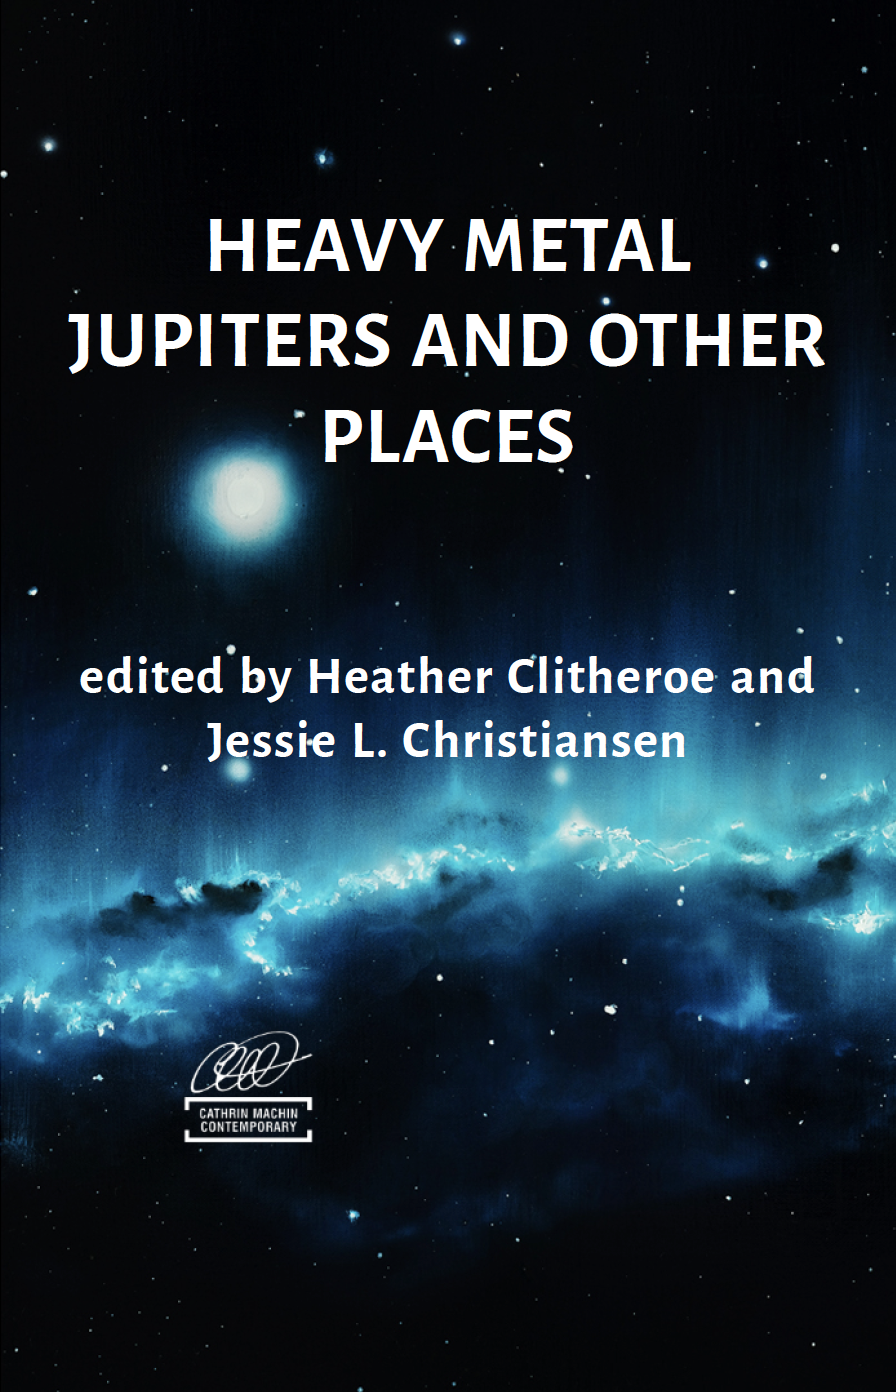 Heavy Metal Jupiters and Other Places - Monday